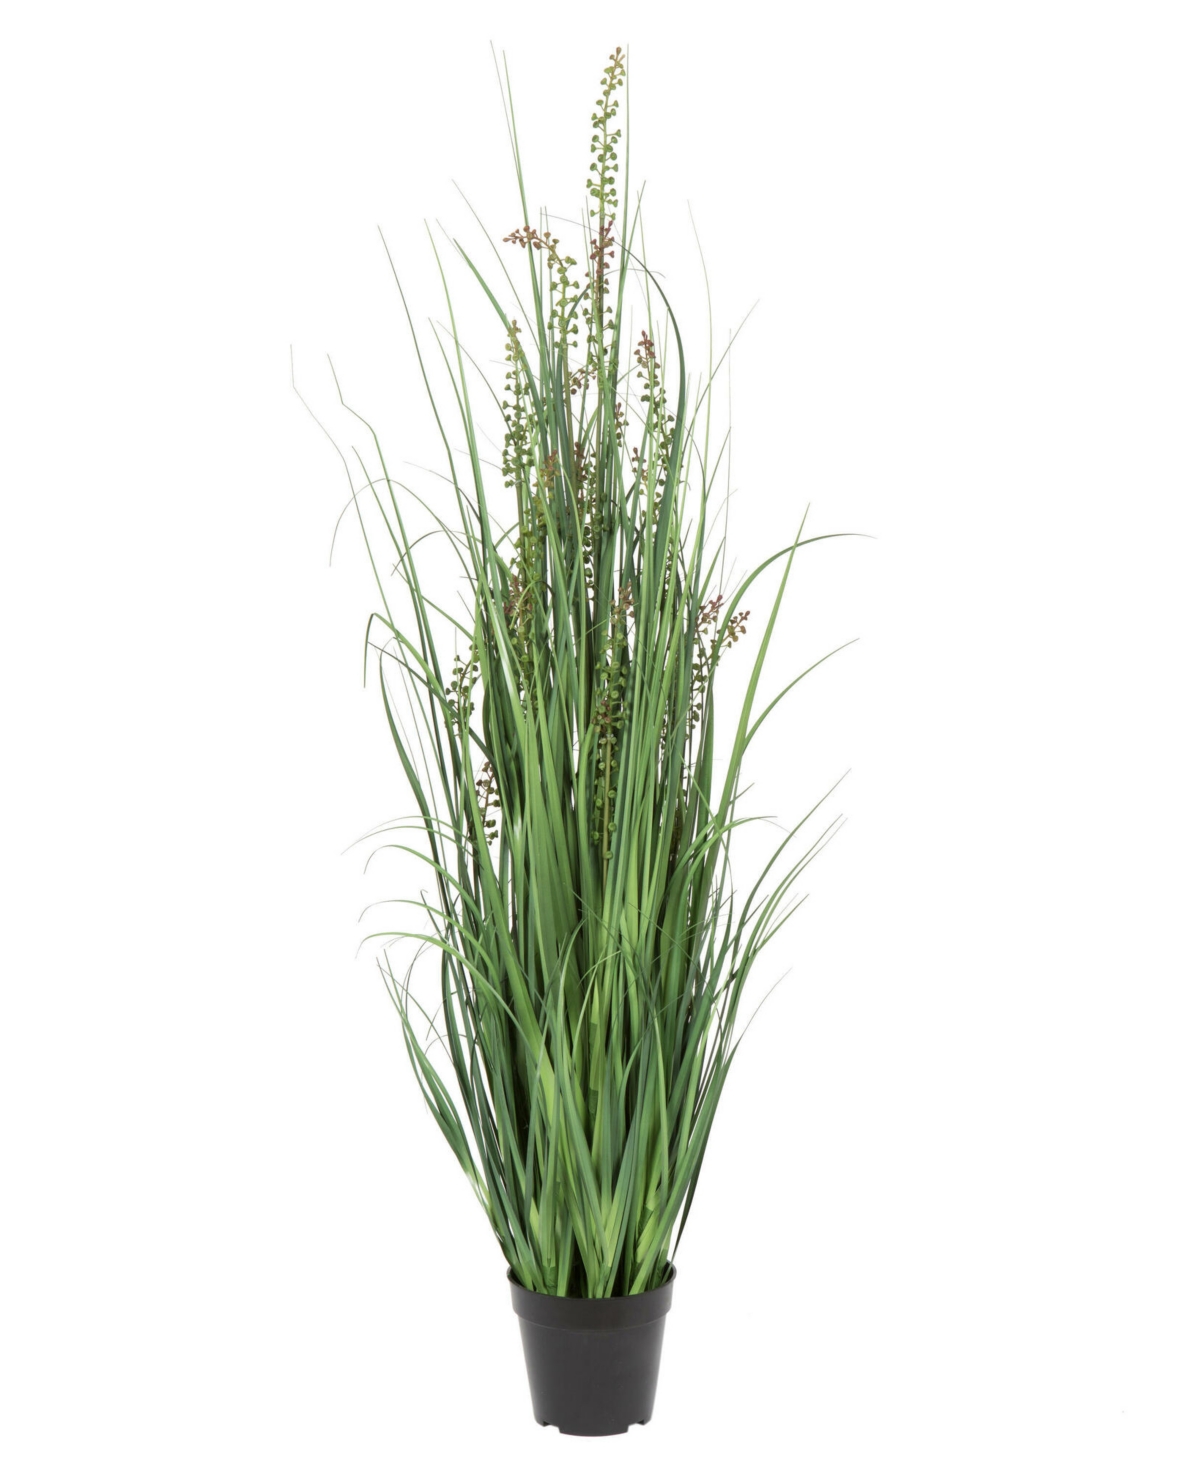 Vickerman 48" Pvc Artificial Potted Green Sheep's Grass And Plastic Grass In No Color